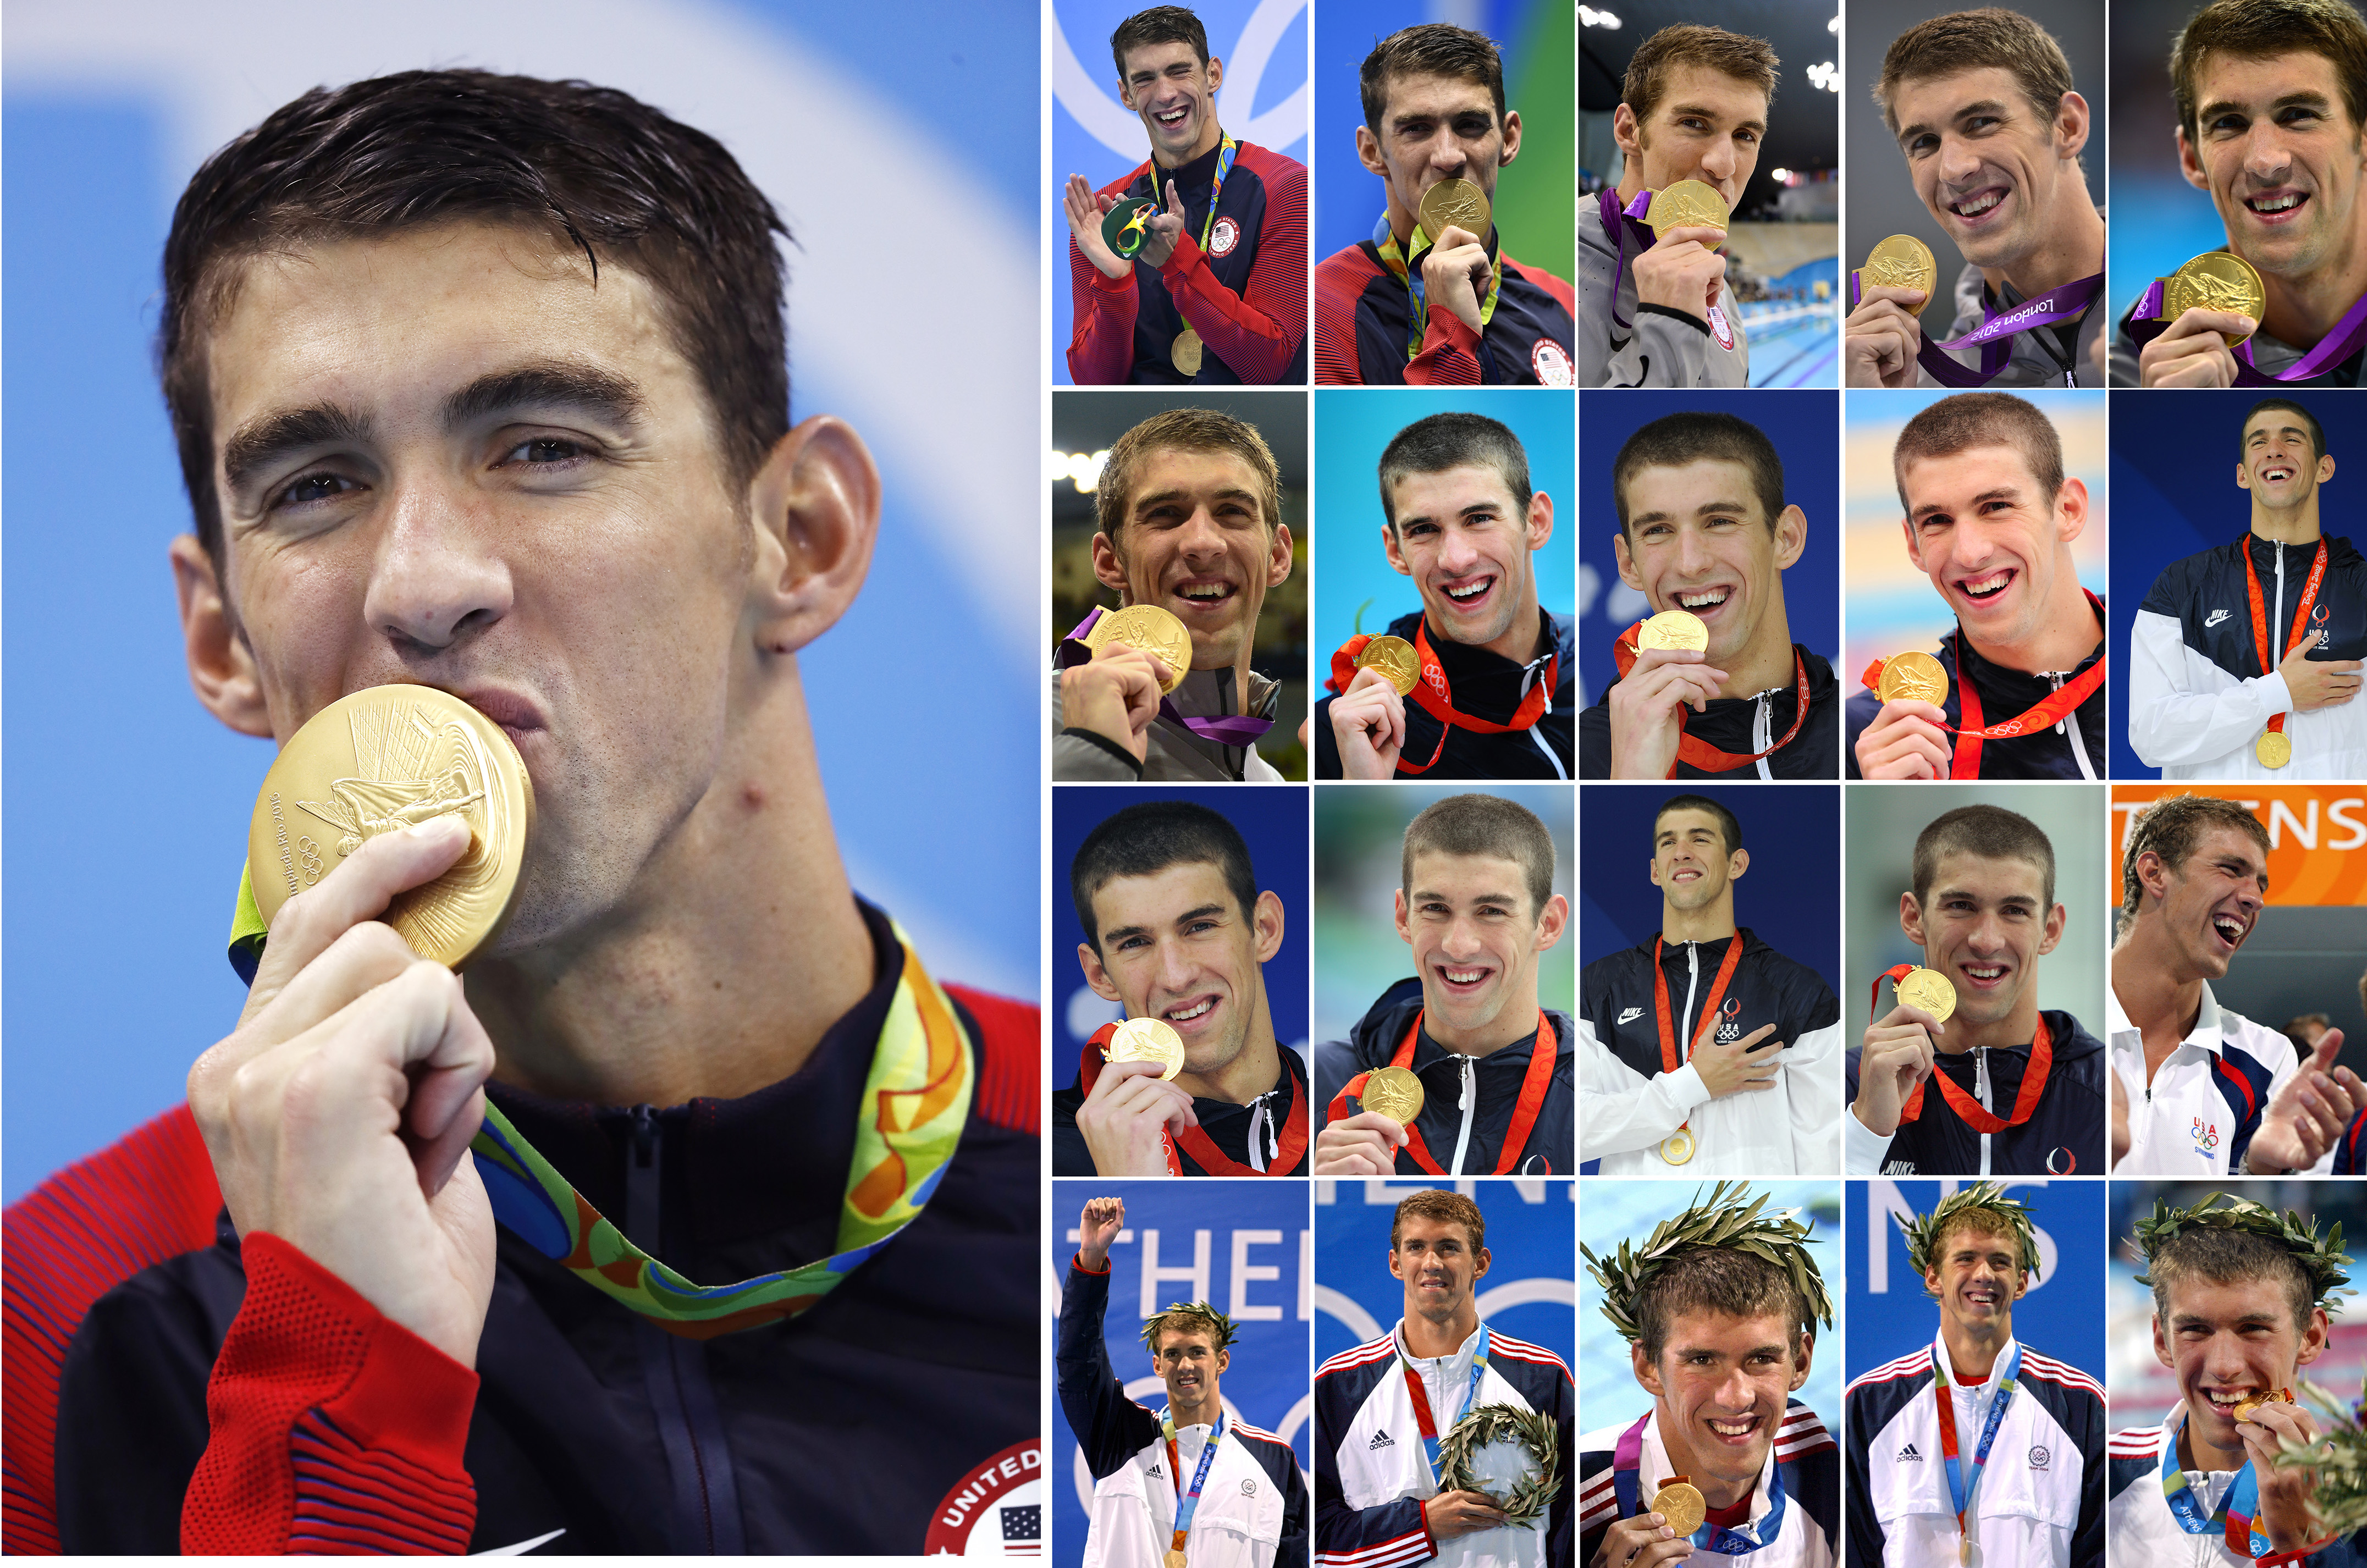 Combination picture made on August 09, 2016 shows US swimmer Michael Phelps with the 21 gold medals he won at the Olympic Games in Athens 2004, Beijing 2008, London 2012 and Rio 2016.  / AFP PHOTO / STF